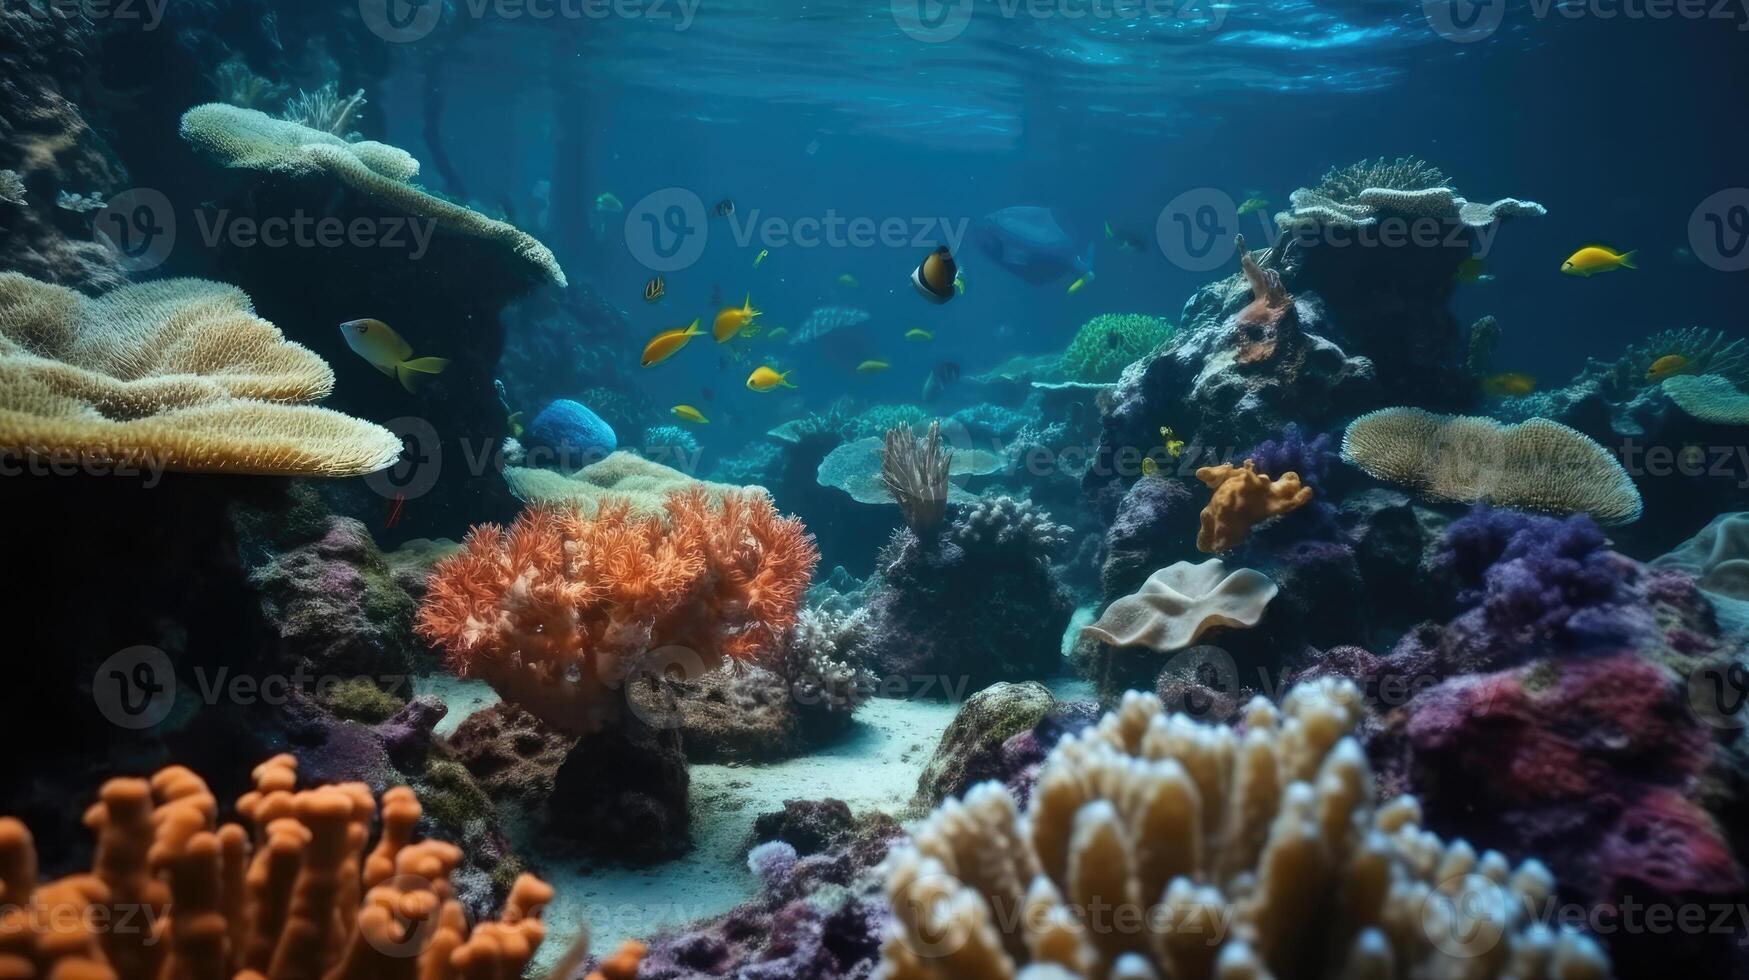 Underwater scene. Coral reef, colorful fish groups and sunny sky shining through clean ocean water. Space underwater for you to fill or just use standalone. High res. photo